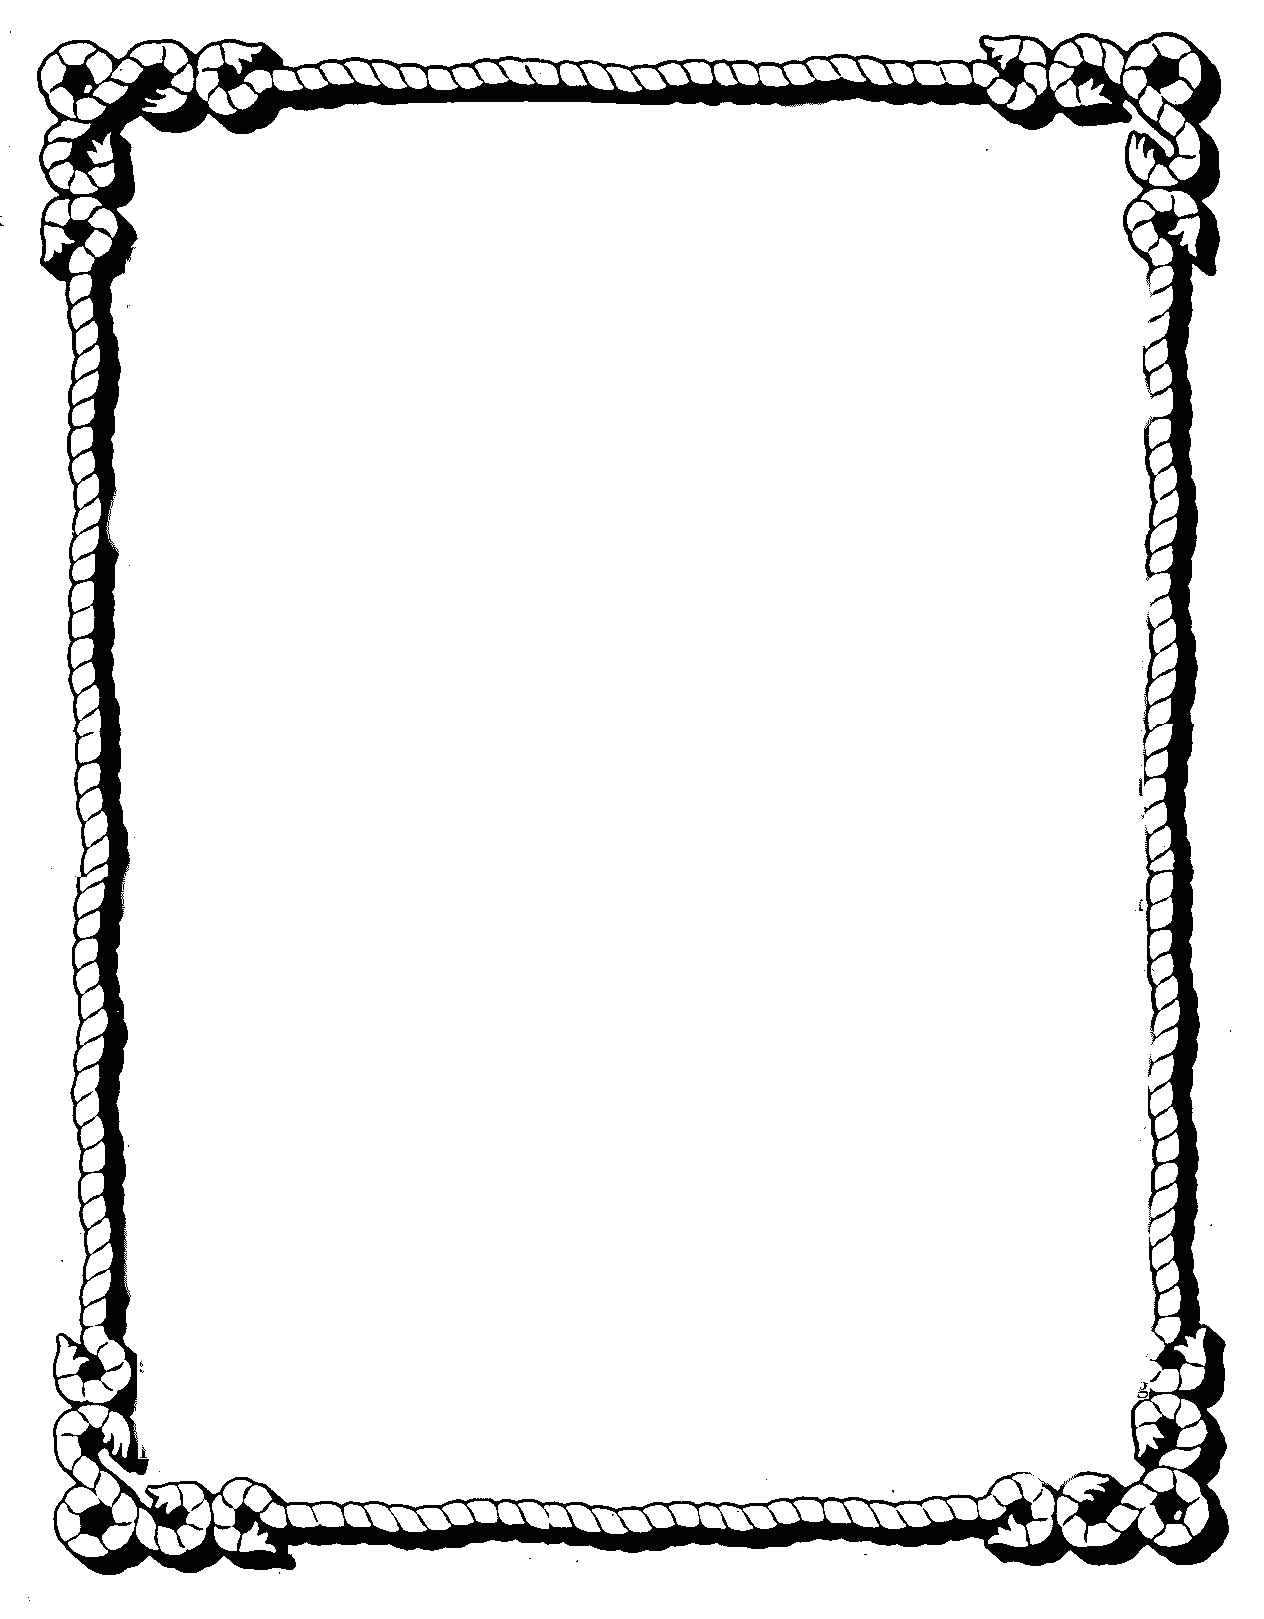 Free Simple Beautiful Borders For Projects On Paper, Download Free